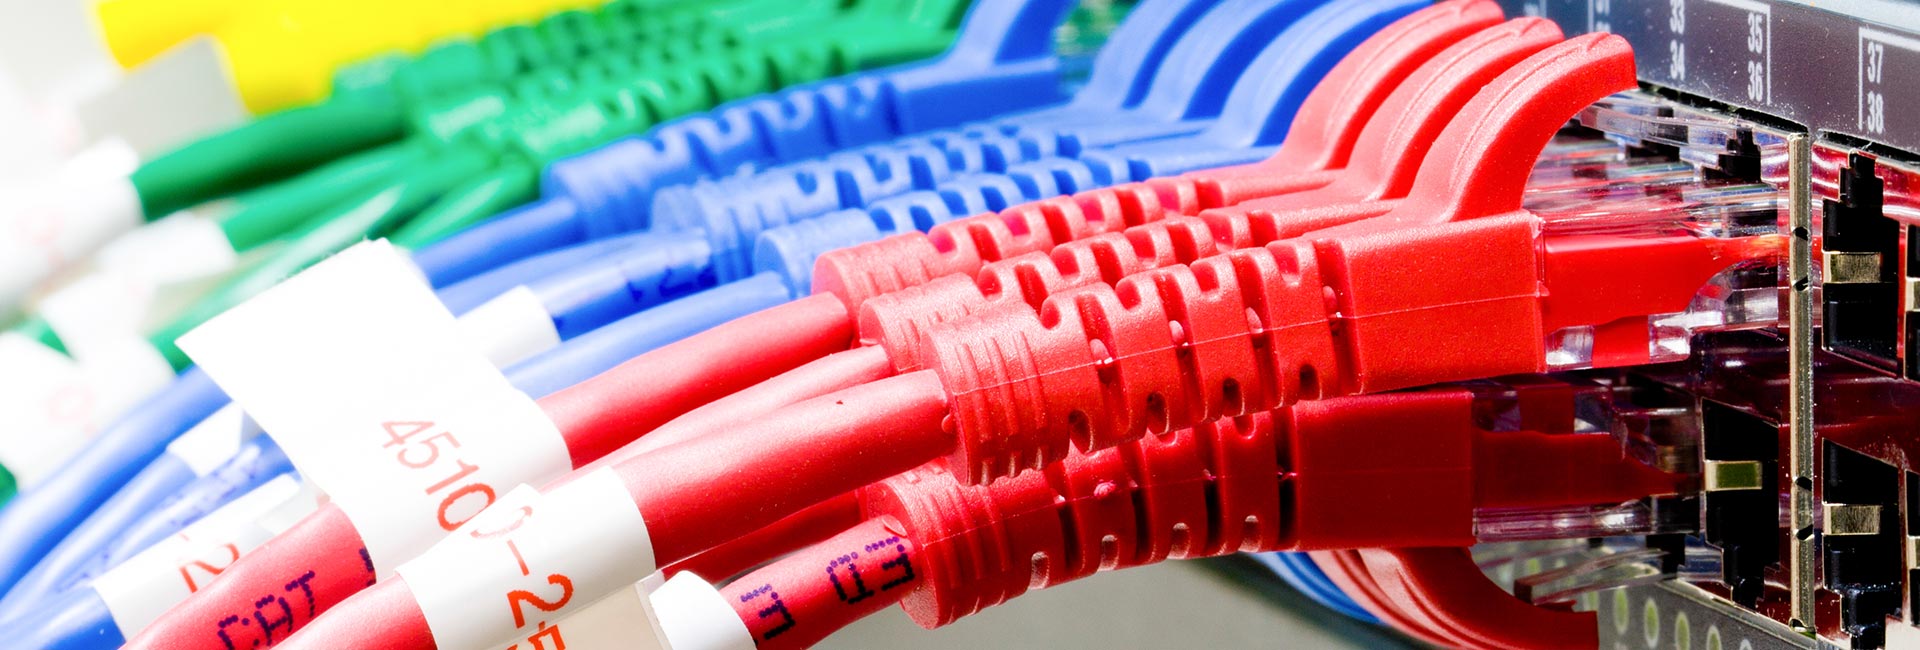 Cabling Services | Our Services | IT Infrastructure | Cube 6 Development Technology Solutions